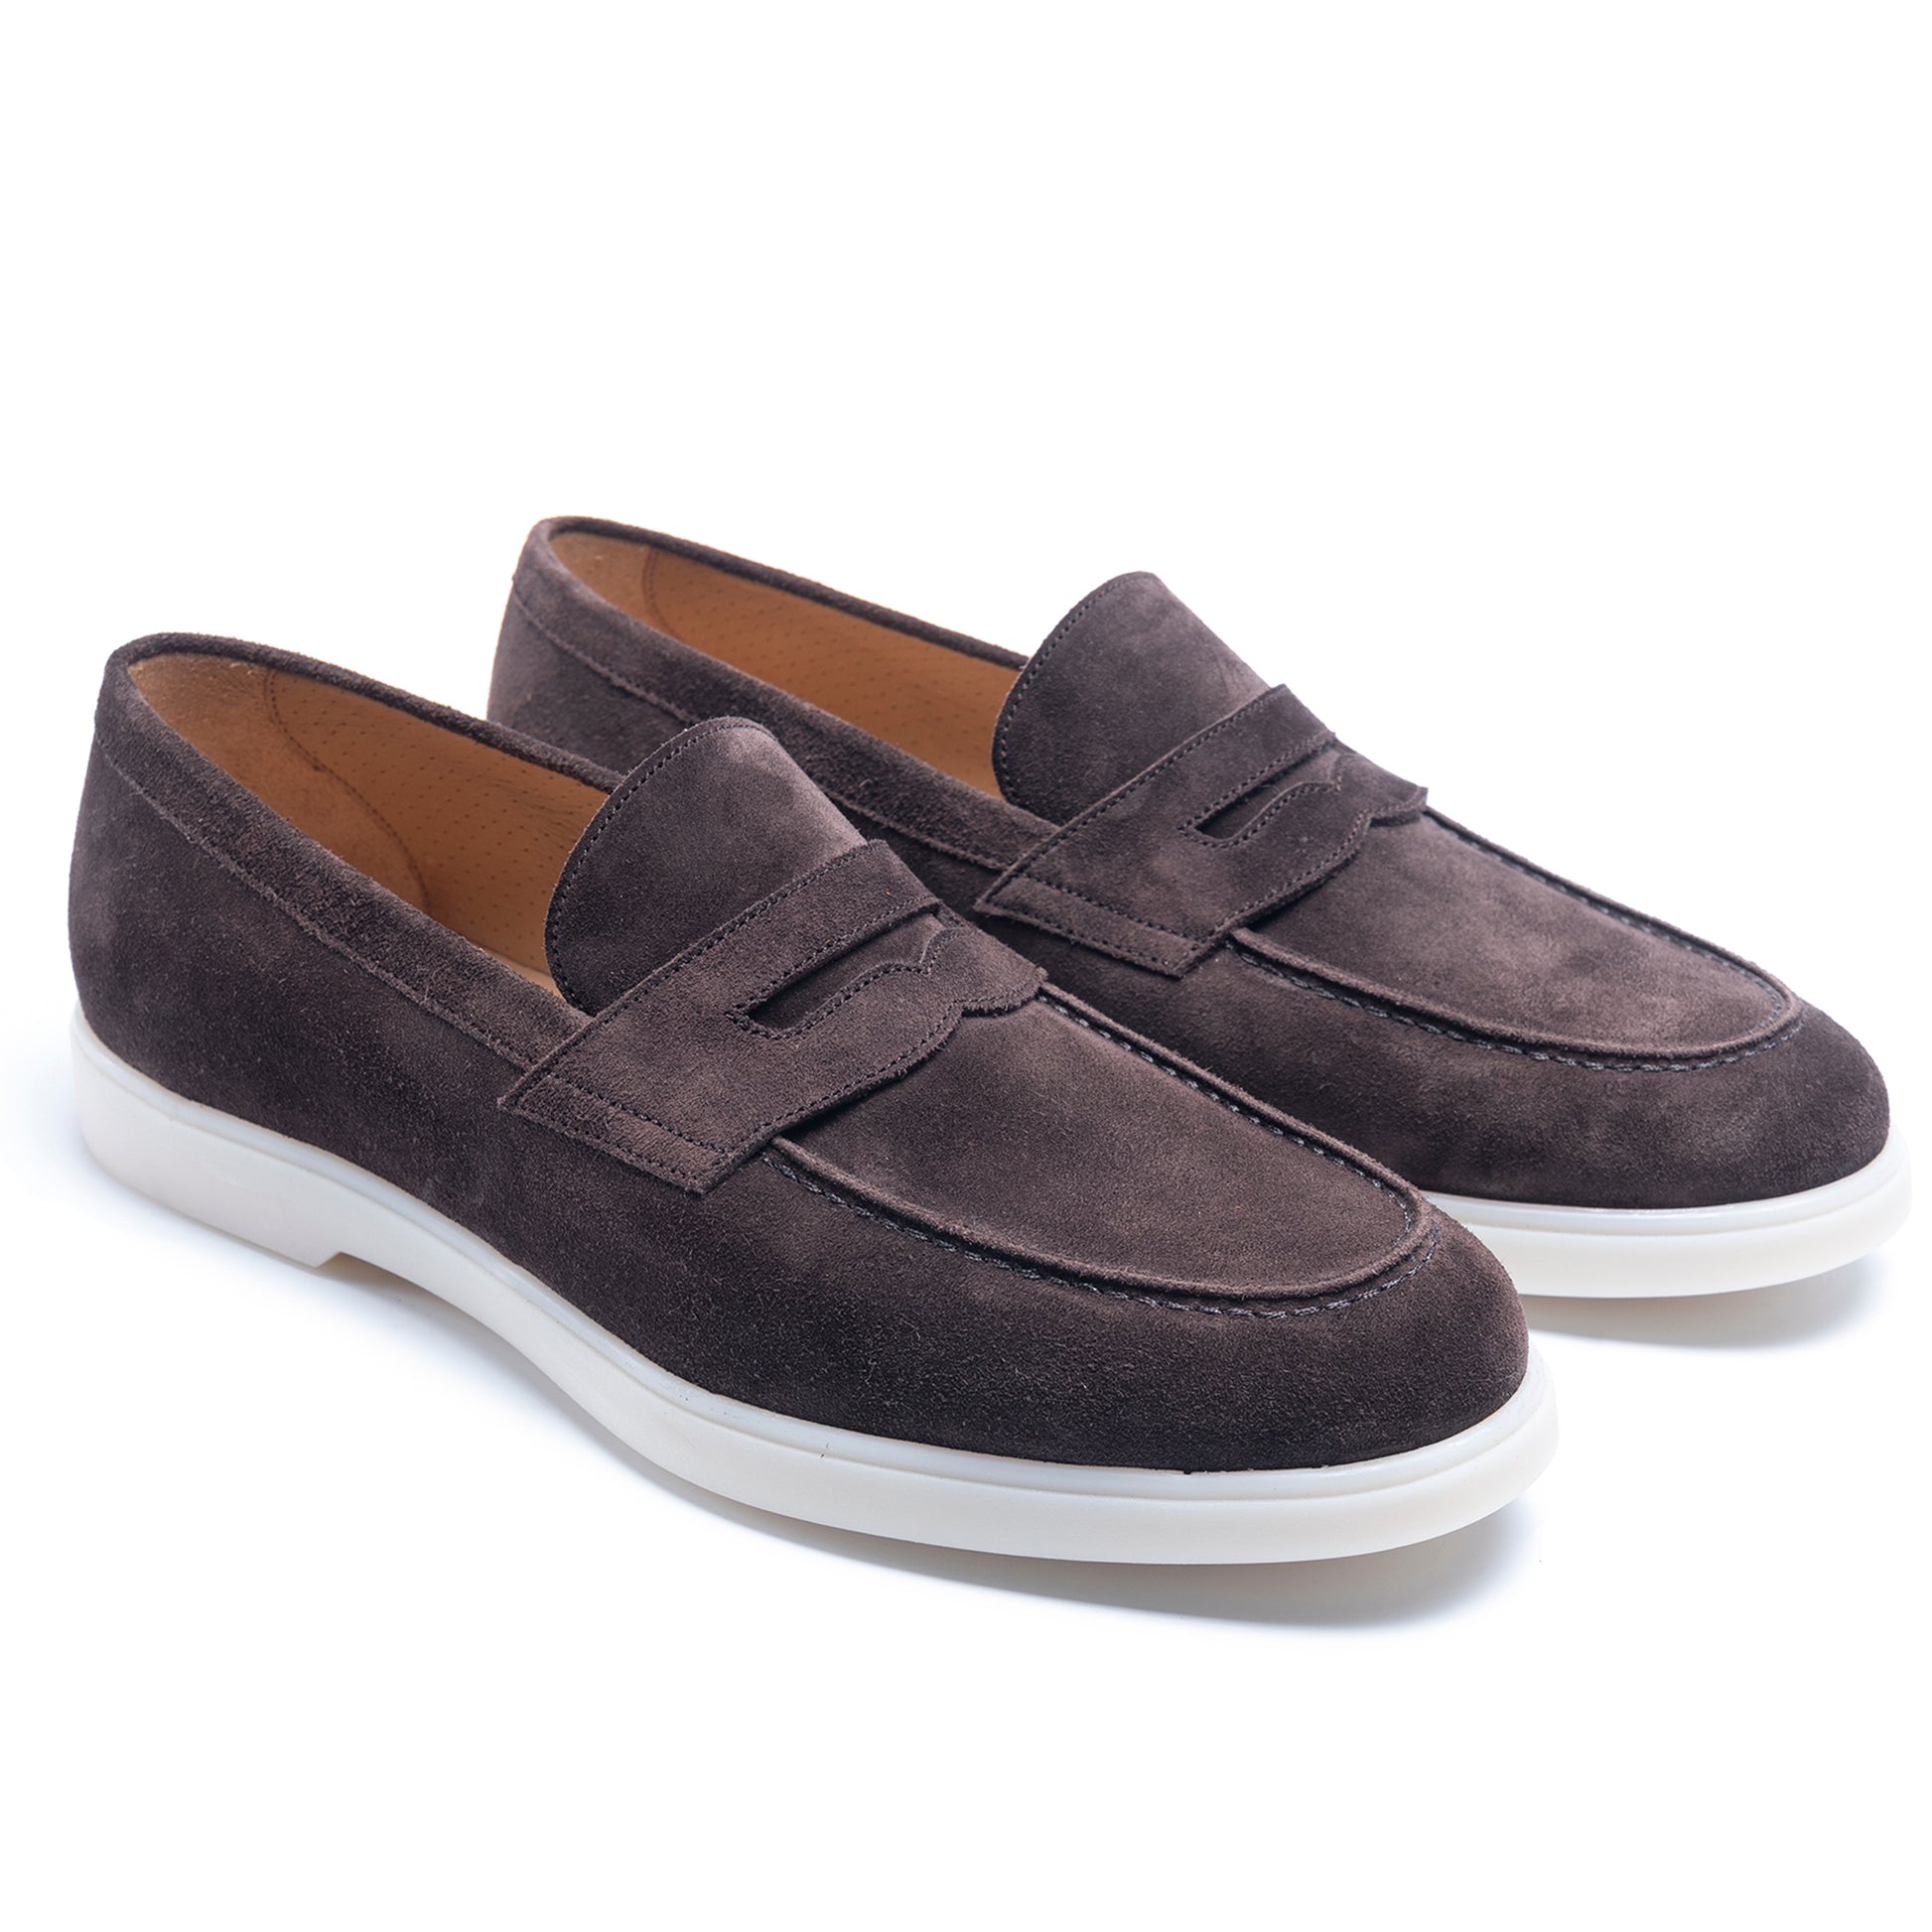 TLB Mallorca leather shoes 2008 / SOMMELIER / SUEDE BROWN